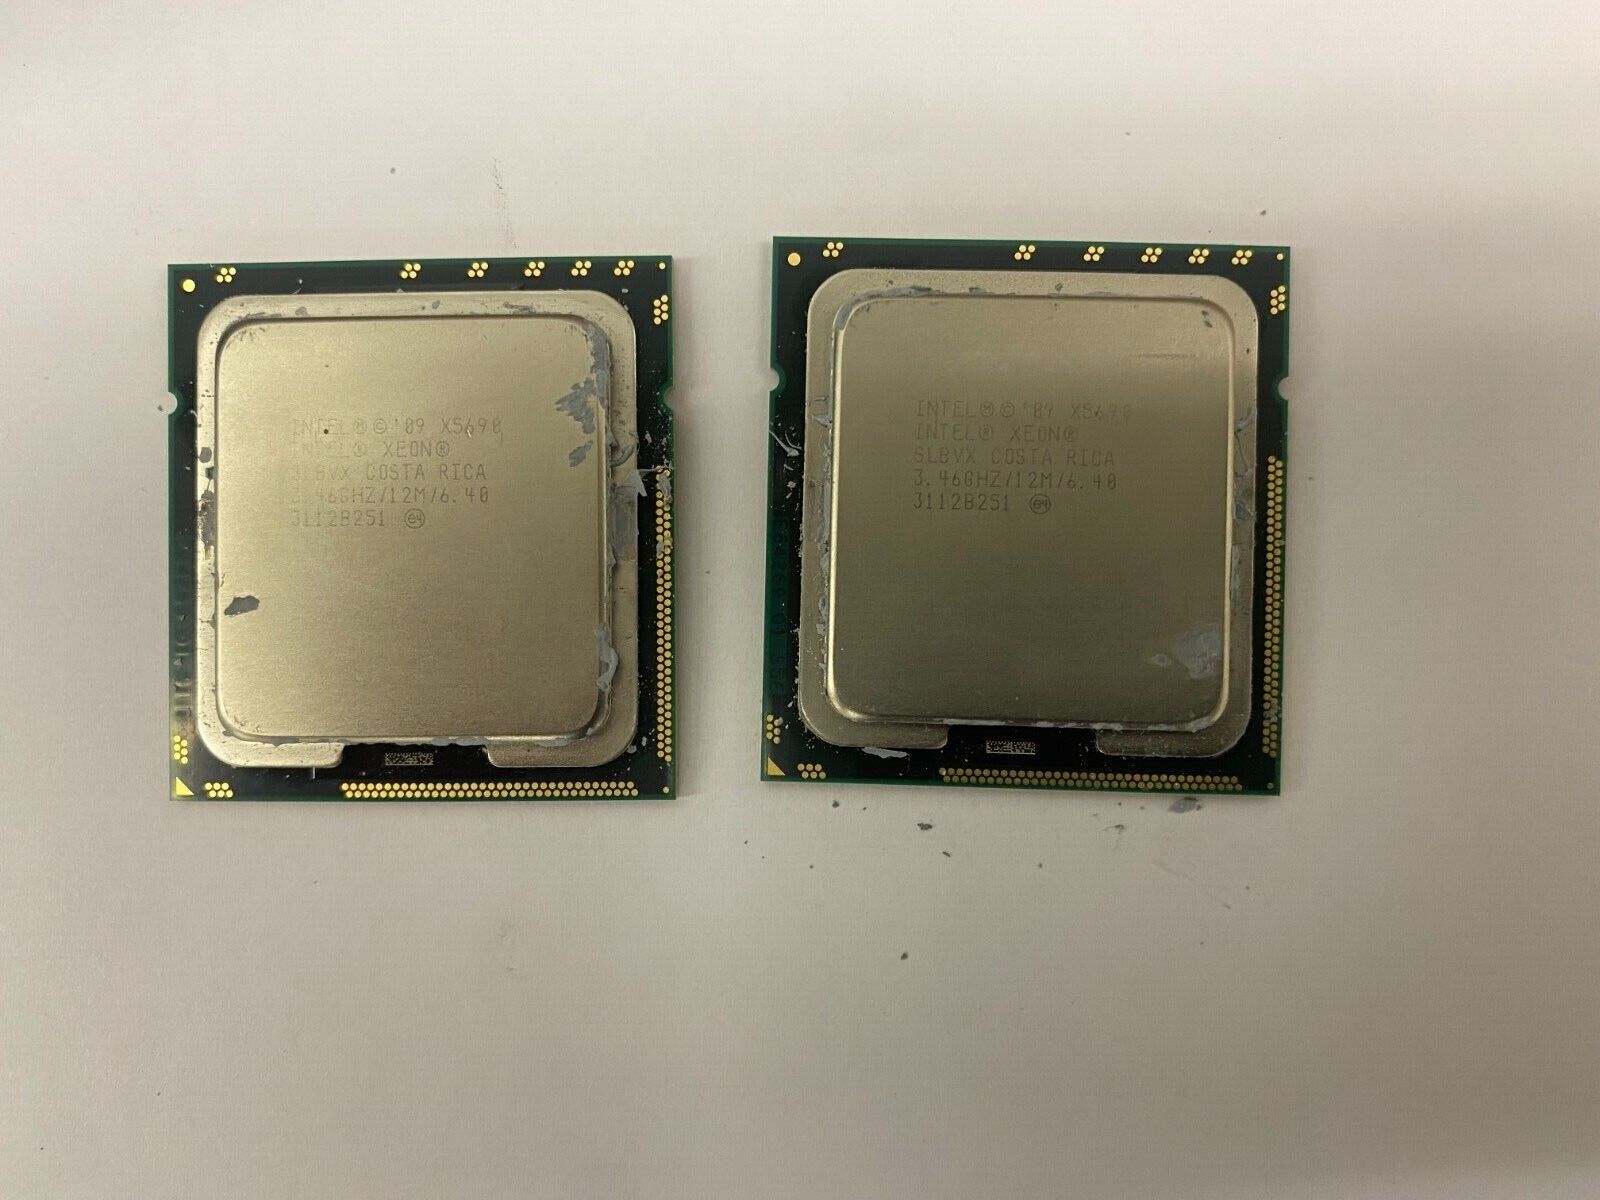  Matched Pair Intel Xeon X5690 3.46GHz 6.4GT/s 12MB 6 Core 1333GHz SLBVX CPU